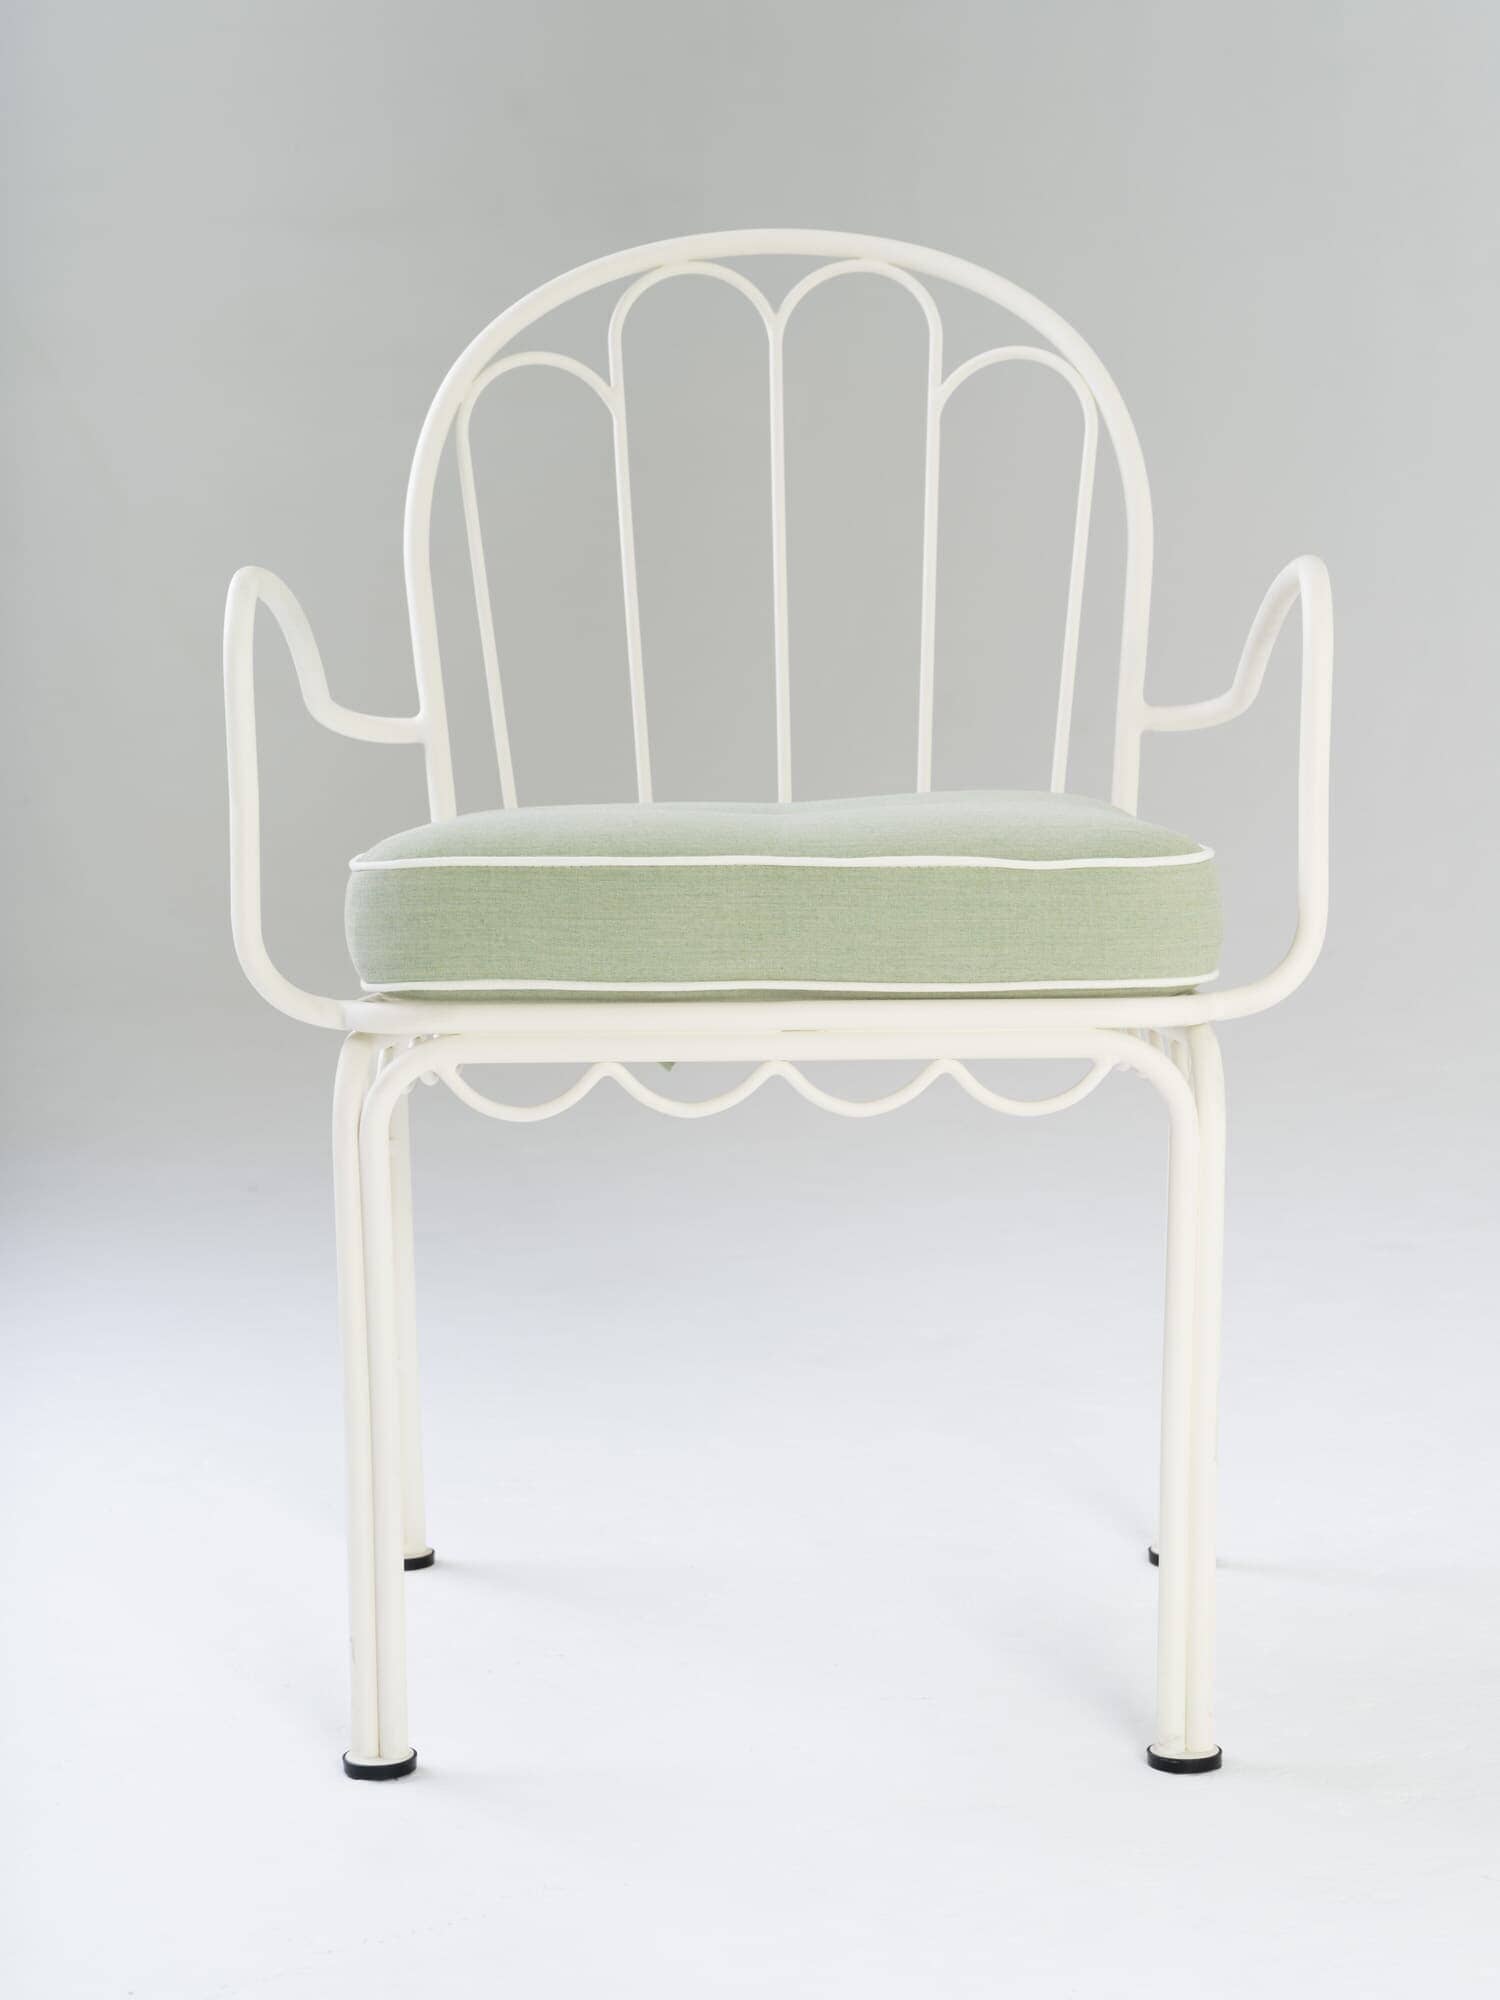 front view of green chair cushion on white metal chair in studio